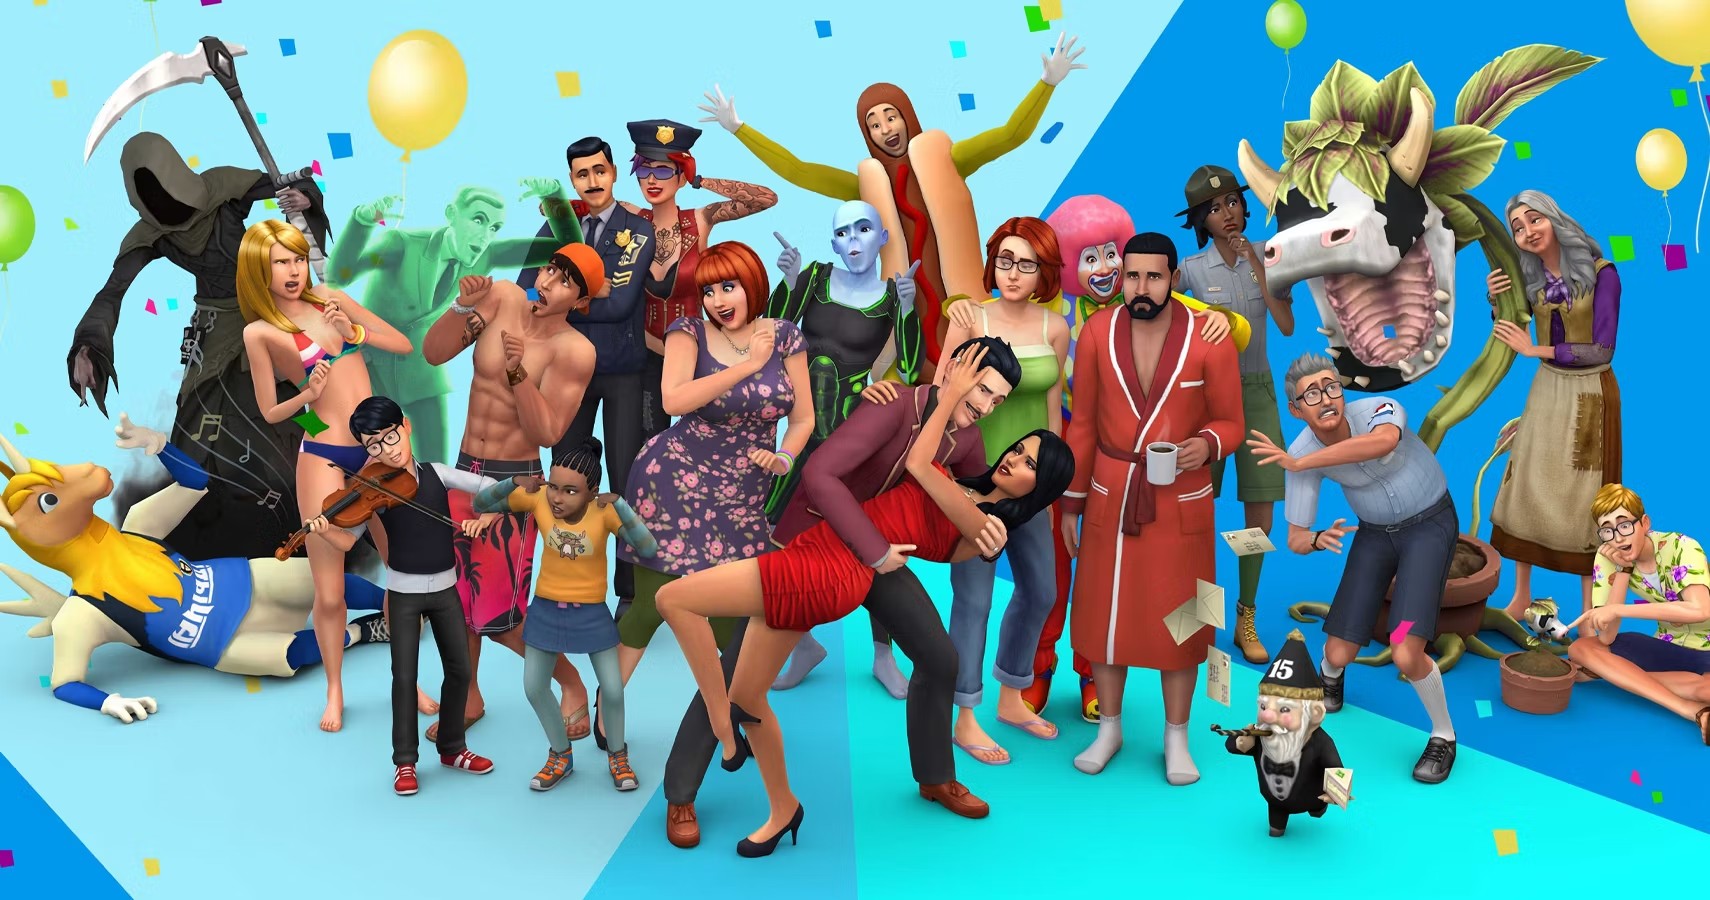 The Sims 4 Is Now Free for Everyone on PS4, And EA's Already